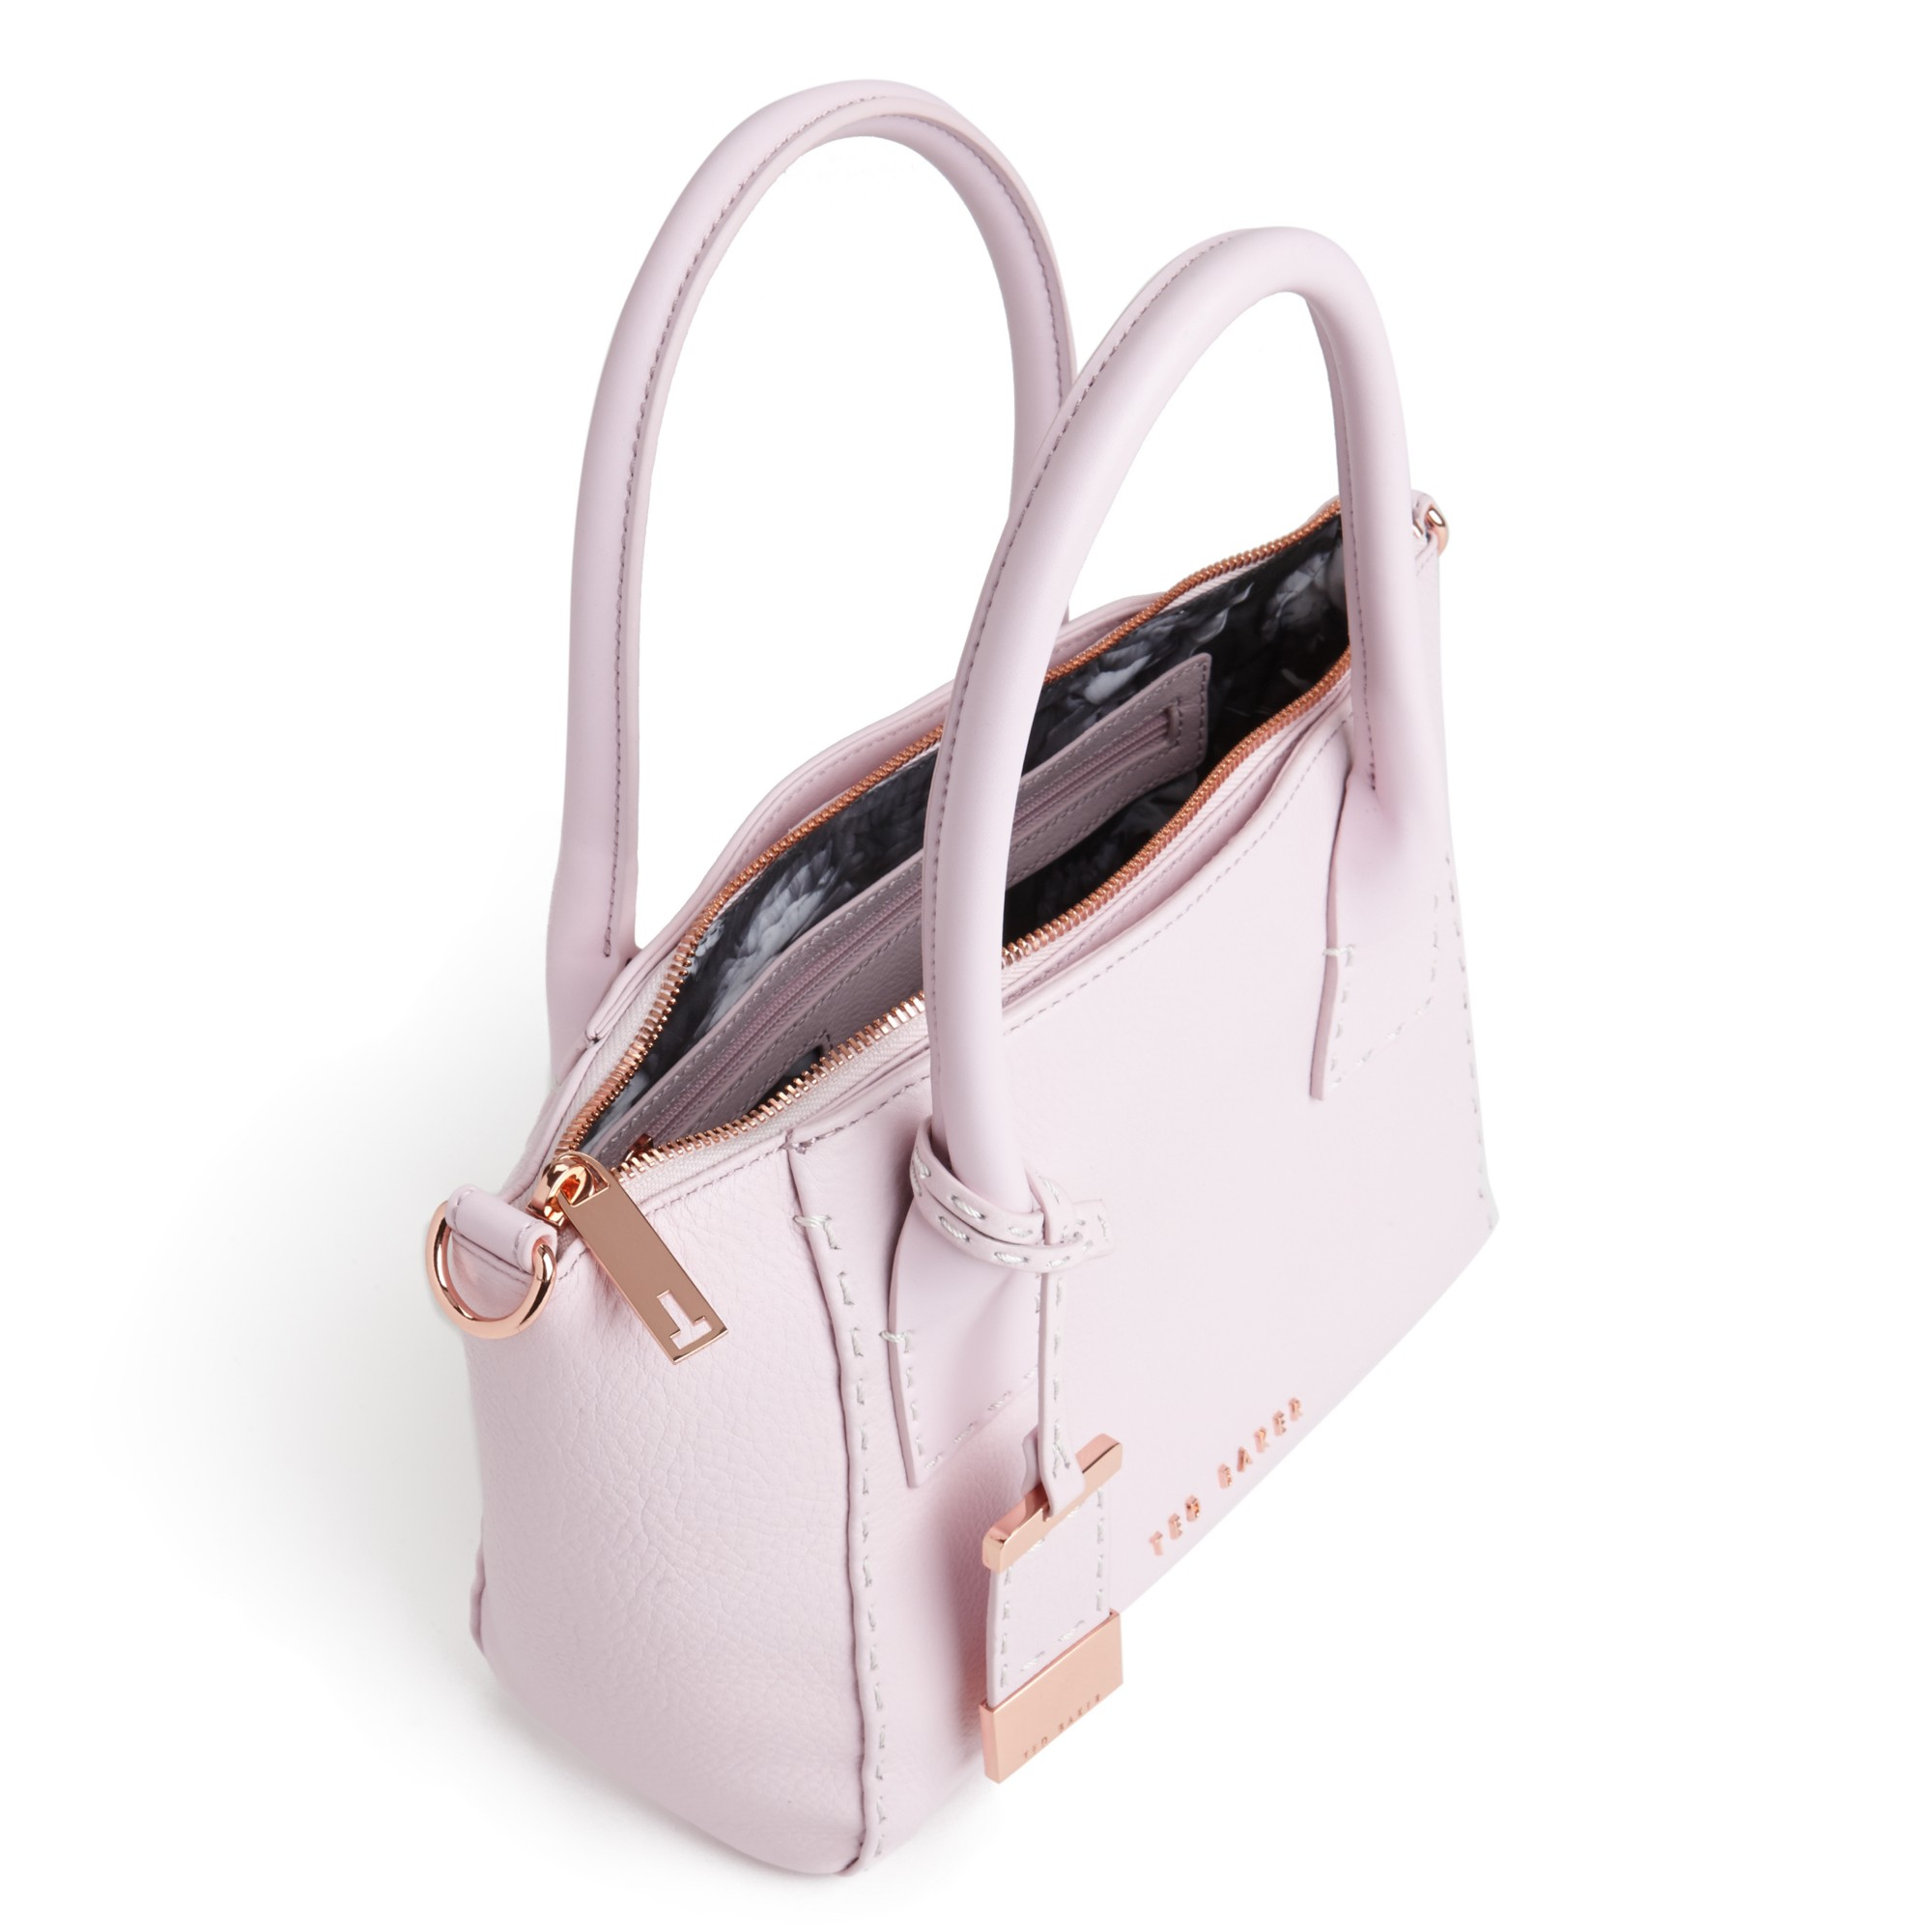 Ted Baker Lauren Small Leather Tote Bag in Pale Pink (Pink) - Lyst